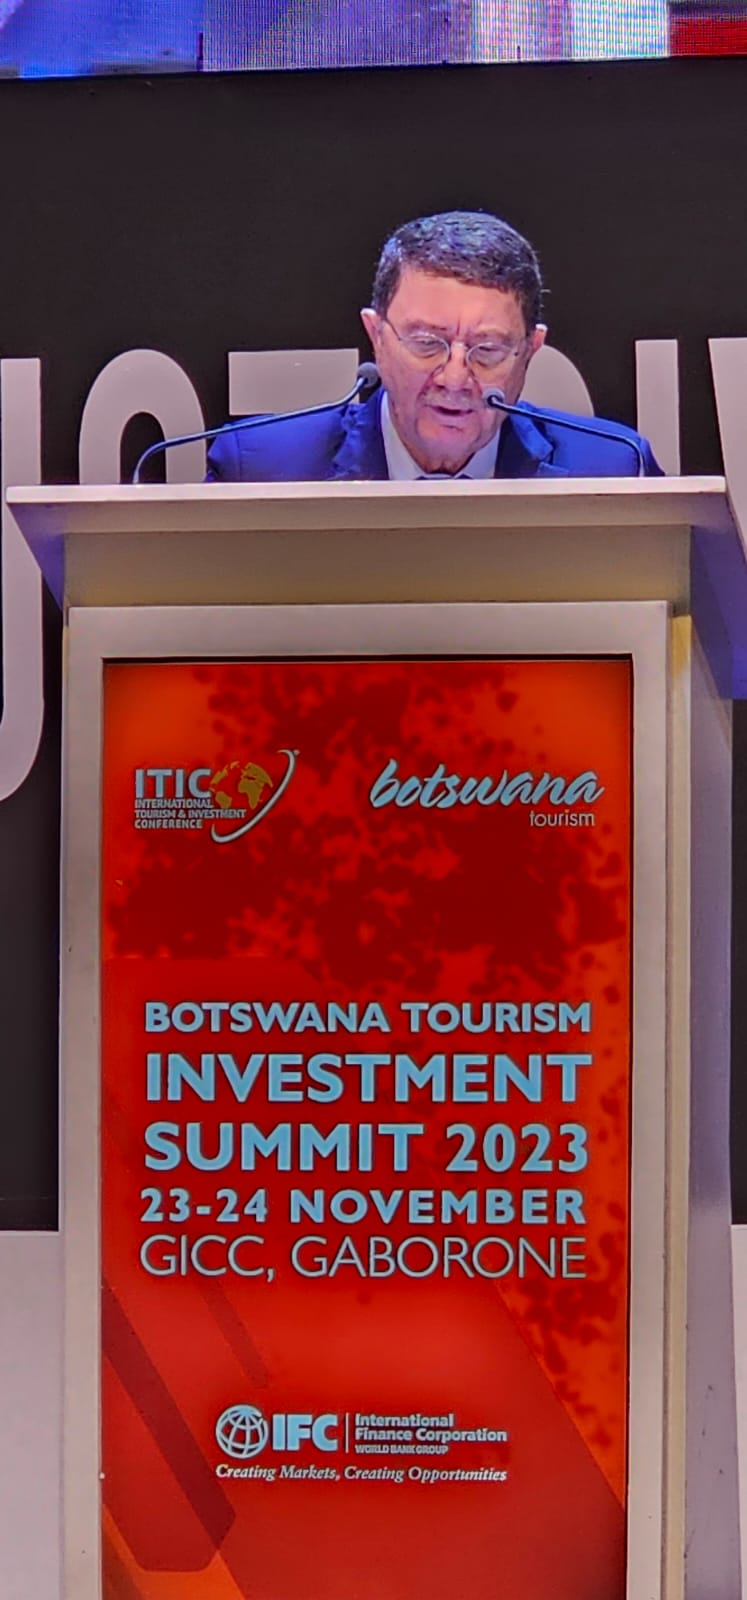 Meetings & Convention News: The First Ever Botswana Tourism Investment Summit Opens with Dr. Taleb Rifai